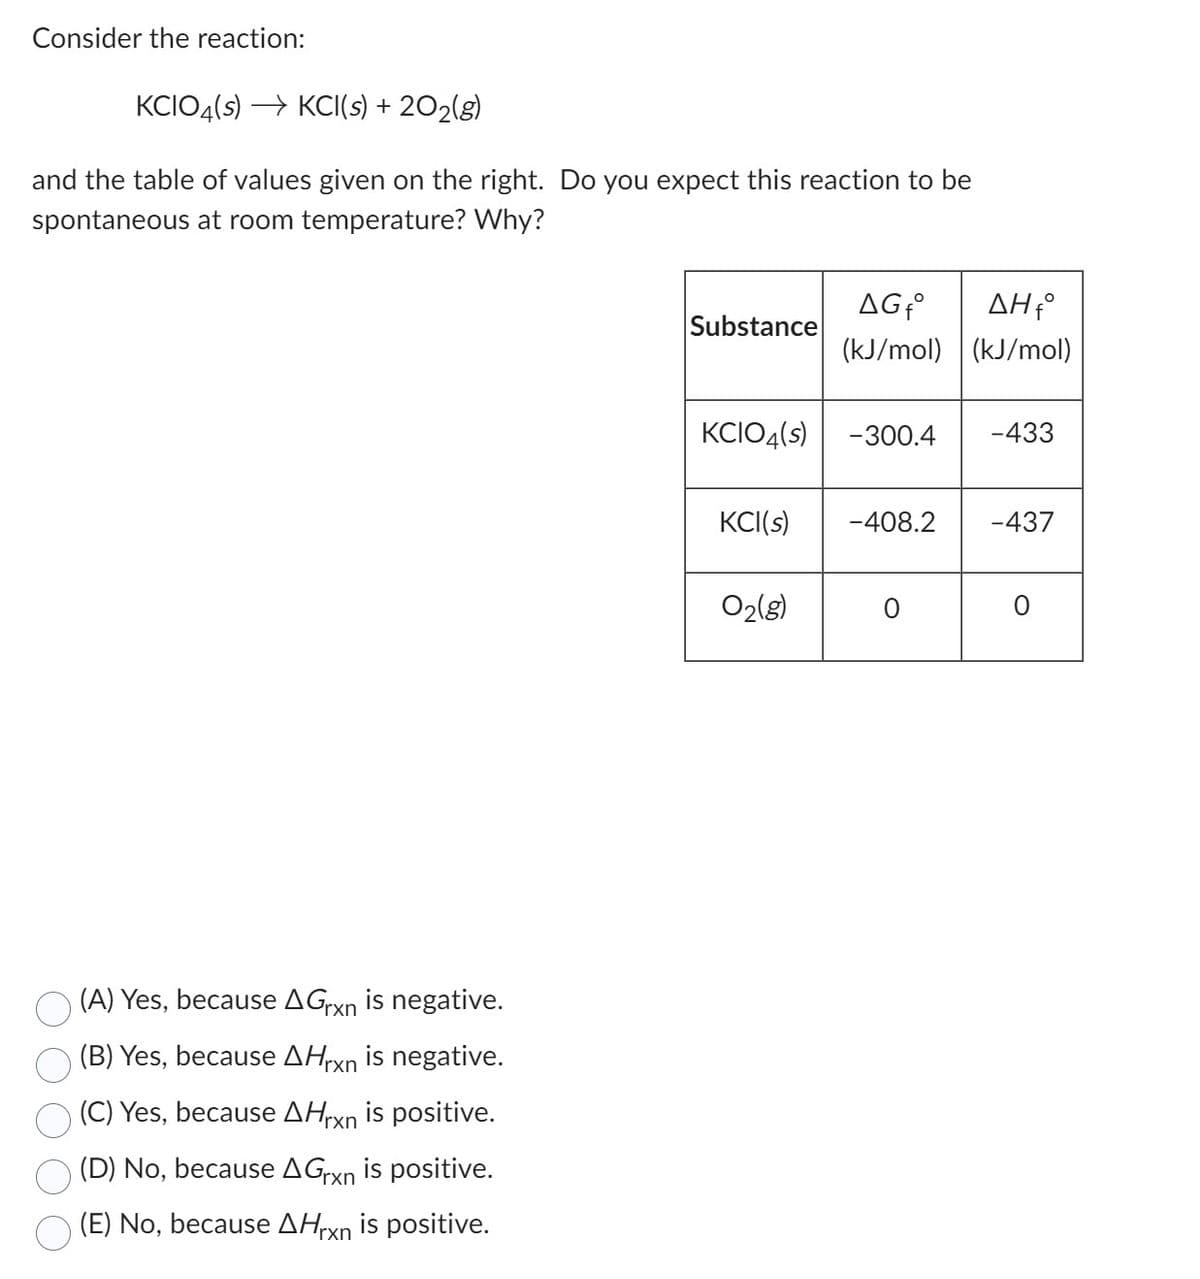 Consider the reaction:
KCIO4(s) →KCI(s) + 202(g)
and the table of values given on the right. Do you expect this reaction to be
spontaneous at room temperature? Why?
(A) Yes, because AGrxn is negative.
(B) Yes, because Hrxn is negative.
(C) Yes, because AHrxn is positive.
(D) No, because AGrxn is positive.
(E) No, because Hrxn is positive.
Substance
AG fº
(kJ/mol)
KCIO4(s) -300.4
KCI(s) -408.2
02(8)
0
ΔΗ,°
(kJ/mol)
-433
-437
0